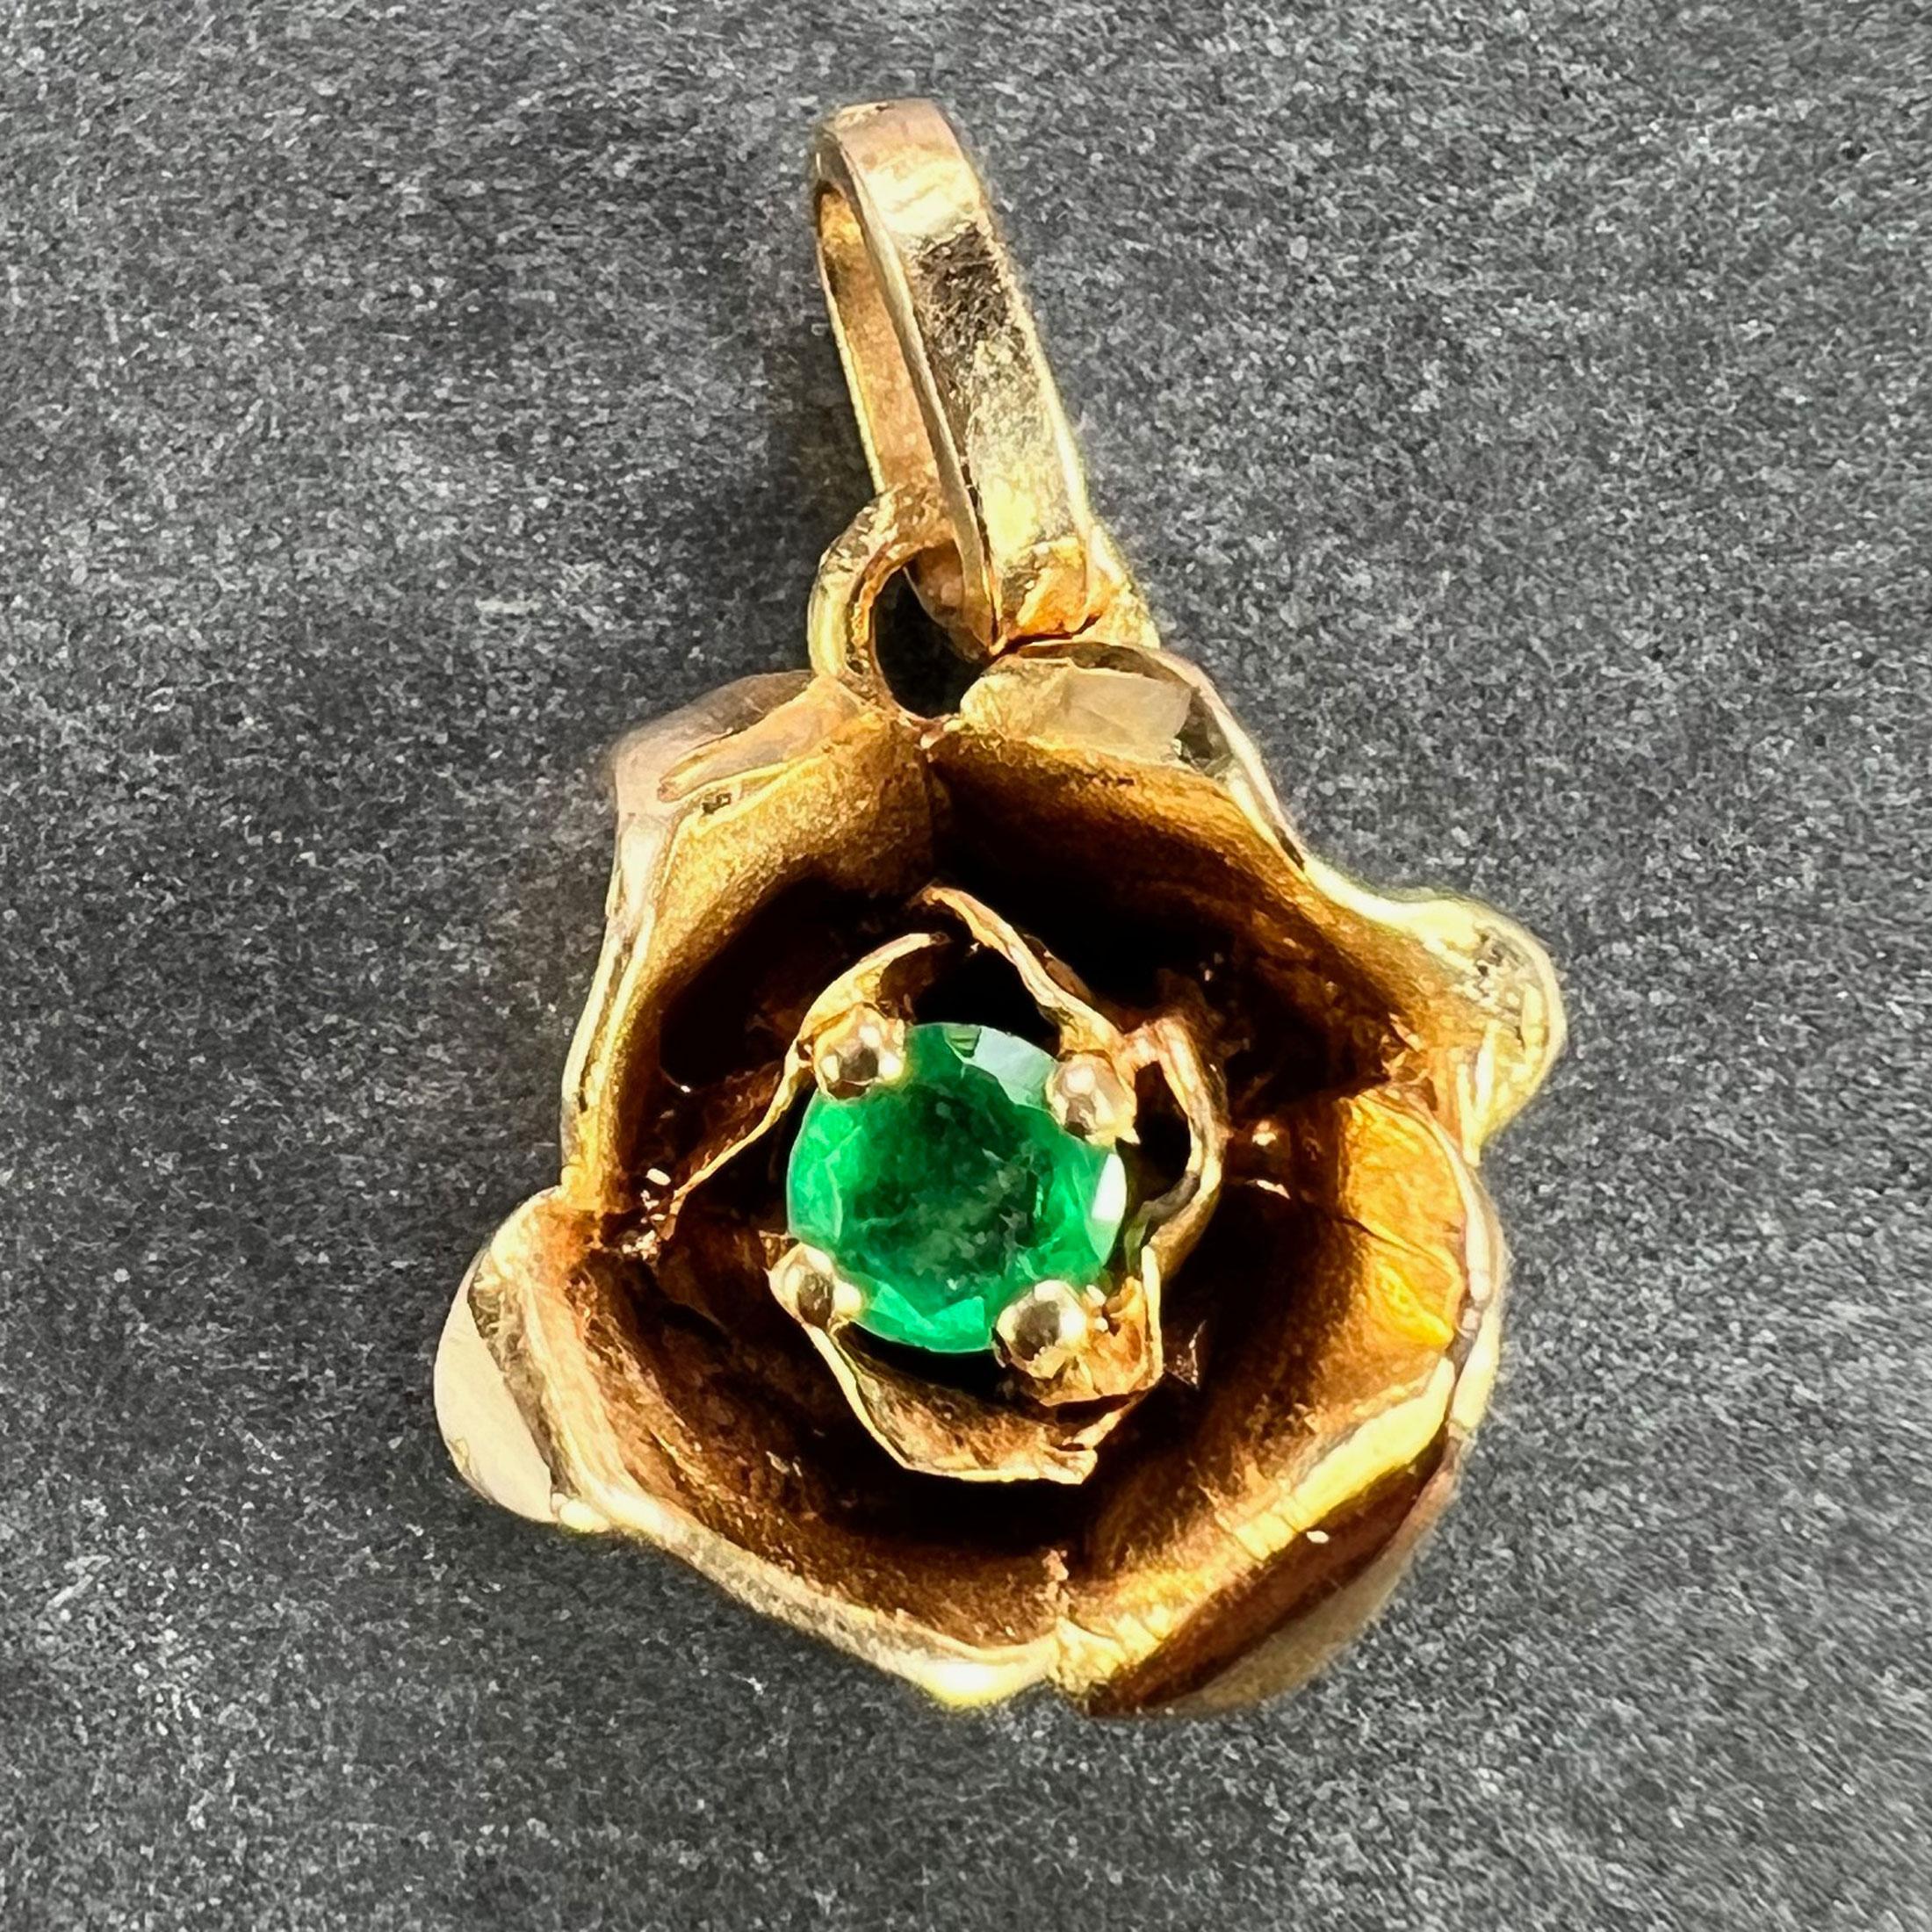 A French 18 karat (18K) yellow gold charm pendant designed as a rose set to the centre with a green emerald. Stamped with the eagle’s head mark for 18 karat gold and French manufacture, and an unknown maker’s mark.

Dimensions: 1.2 x 1 x 0.53 cm